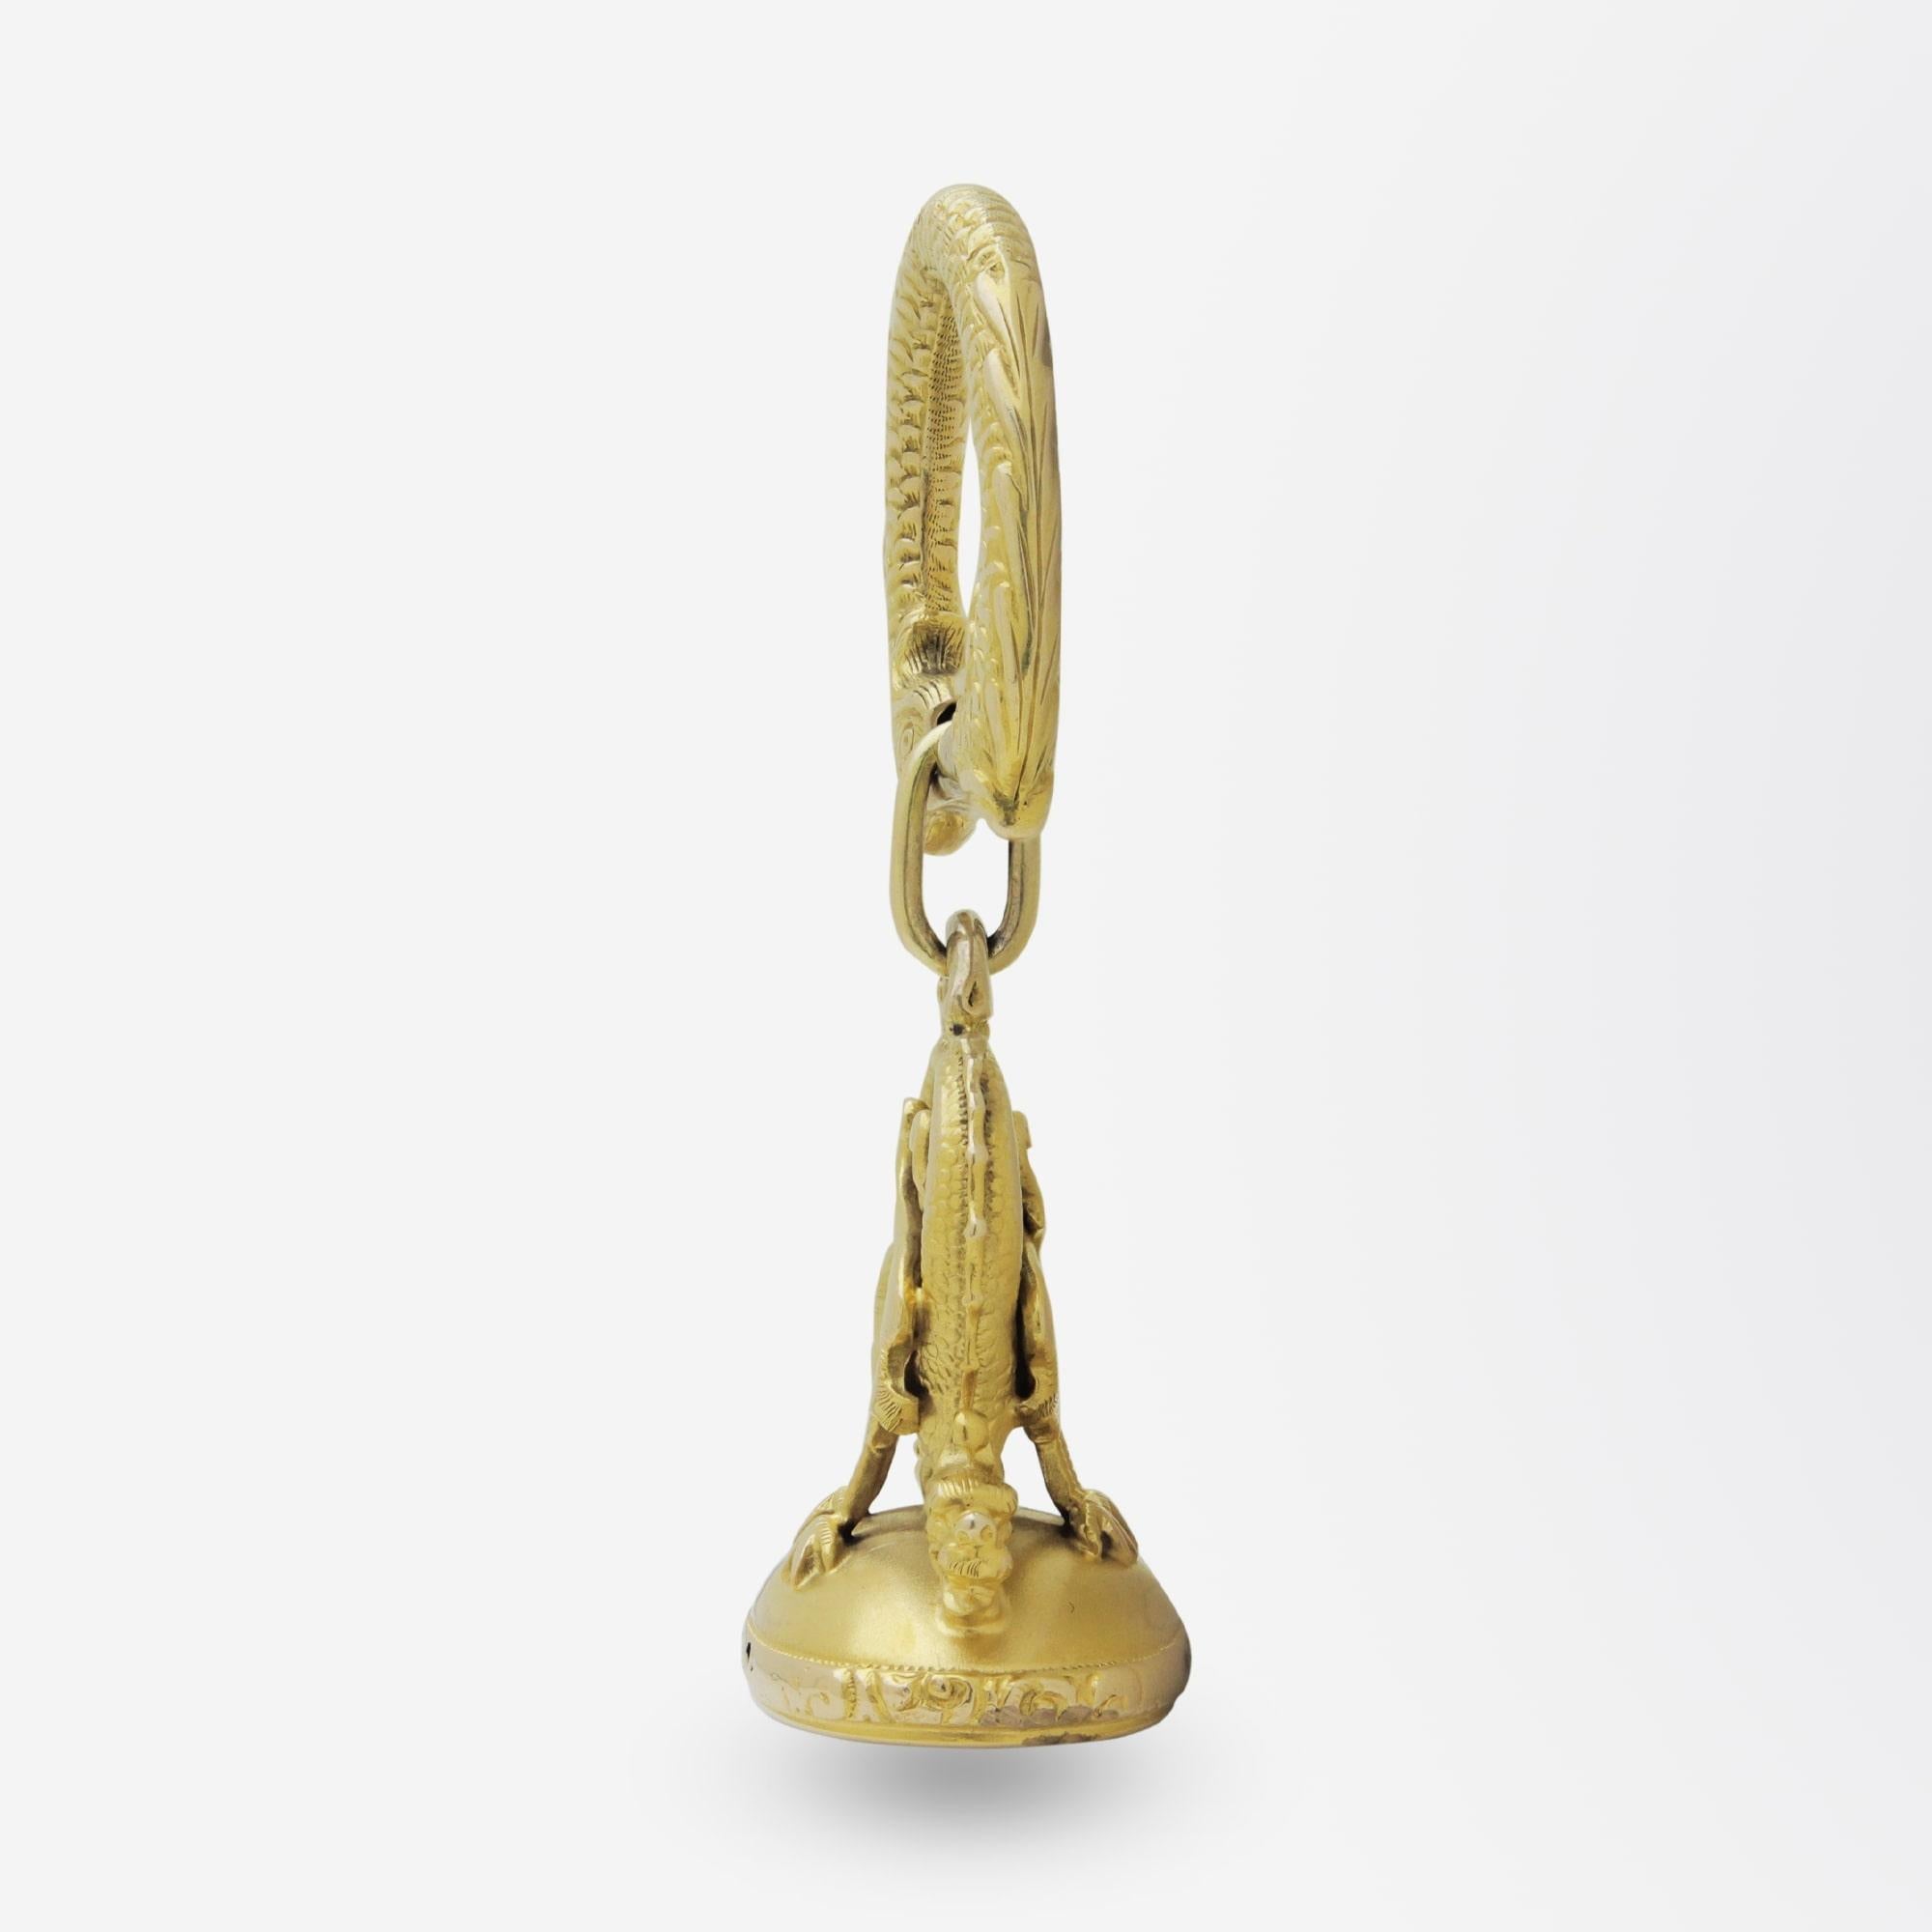 A really intricate and beautifully crafted fob seal pendant from the Victorian period. The piece is crafted from 14 karat yellow gold however is unmarked. The hollow pendant is crafted as a pair of griffins which sit above an oval gold disc engraved